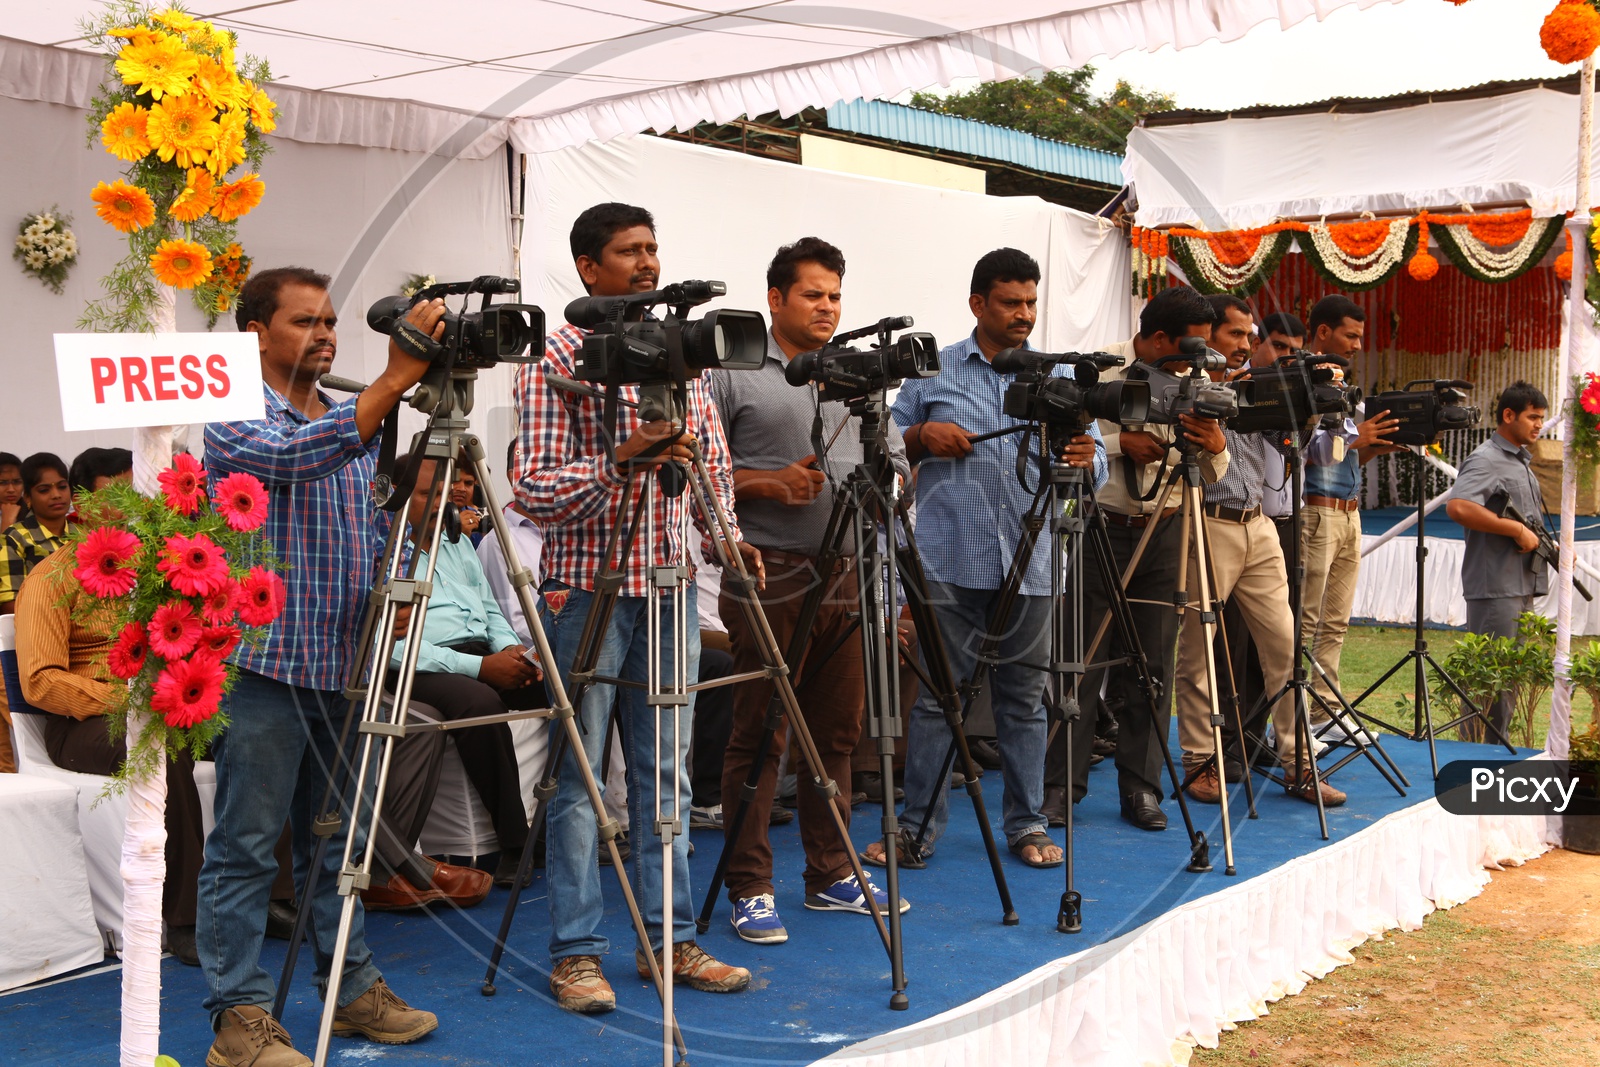 Press or Media journalists, videographers